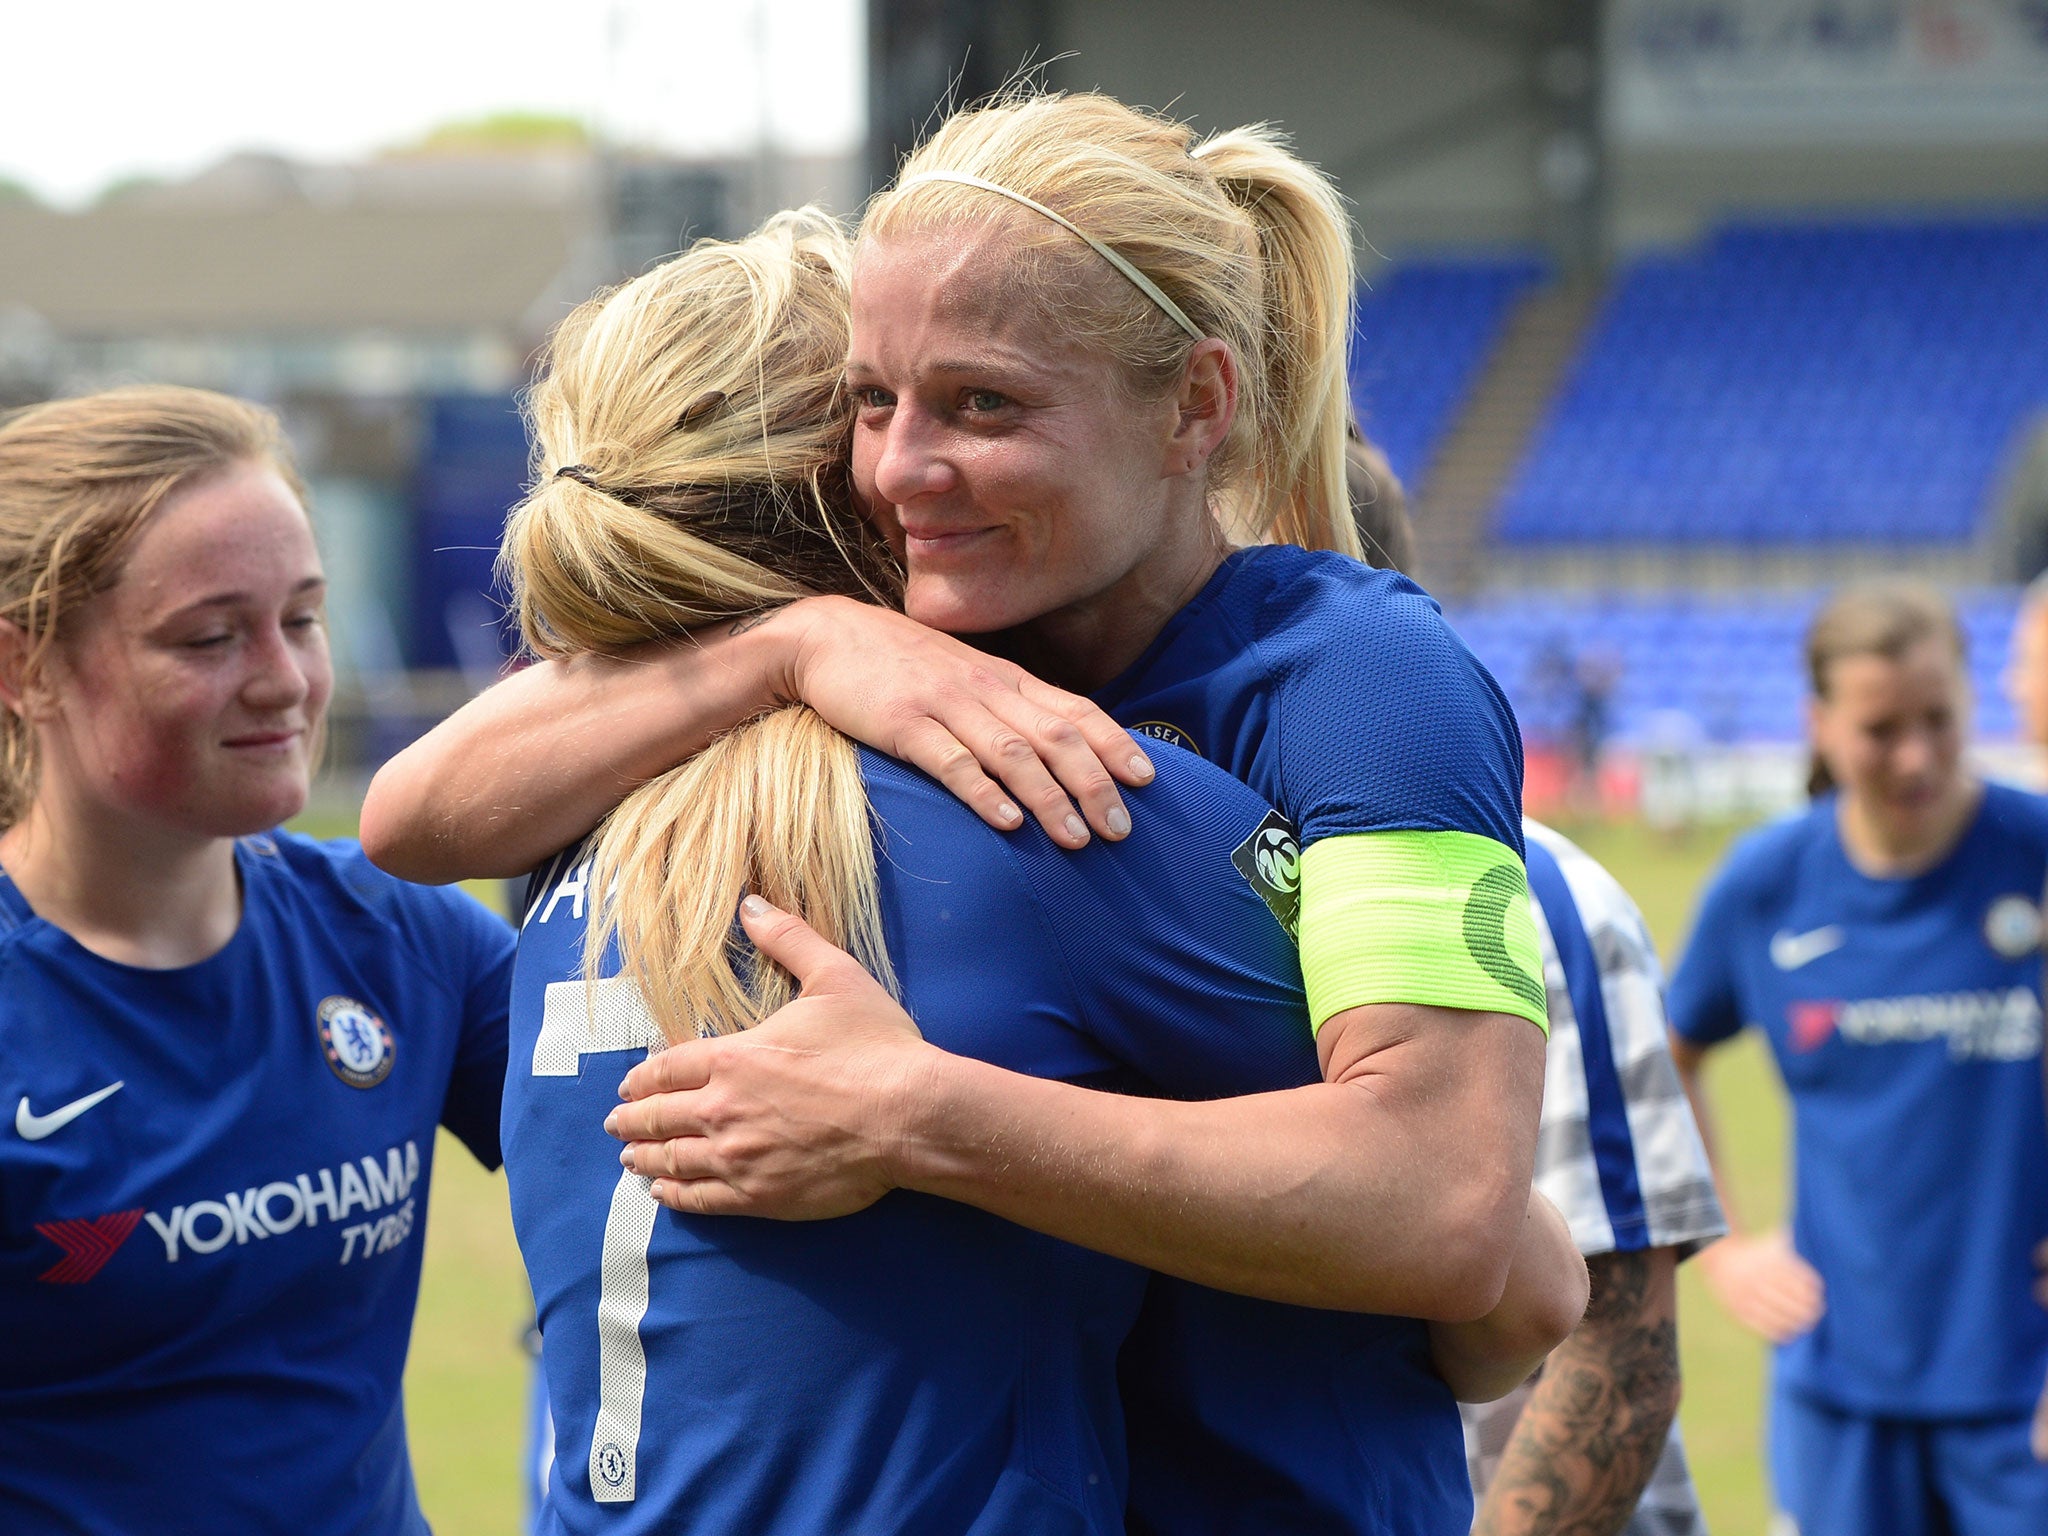 Chelsea won the Women's FA Cup and Women's Super League this season